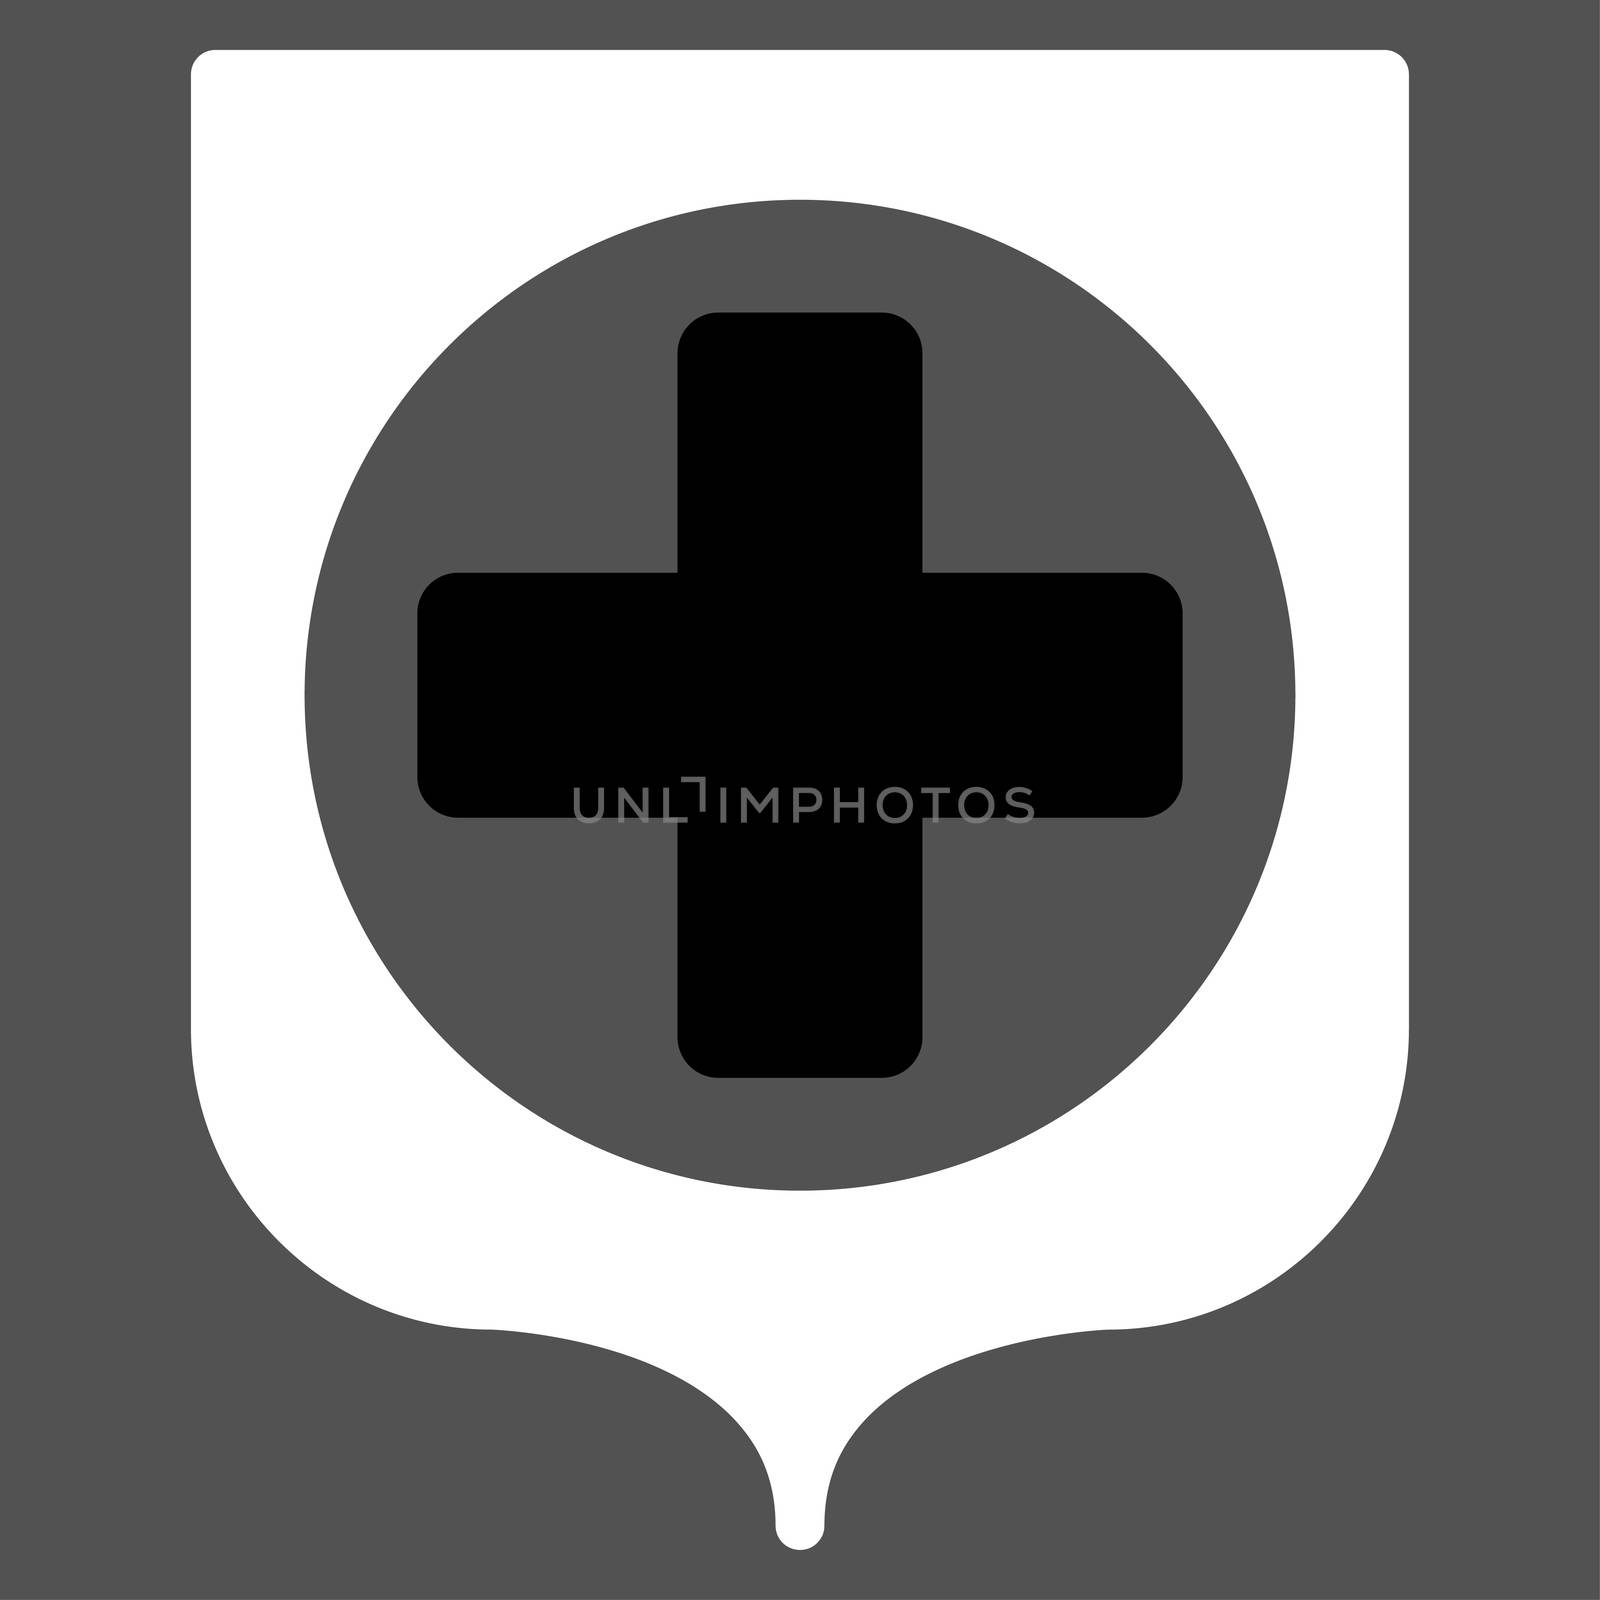 Medical Shield raster icon. Style is bicolor flat symbol, black and white colors, rounded angles, gray background.